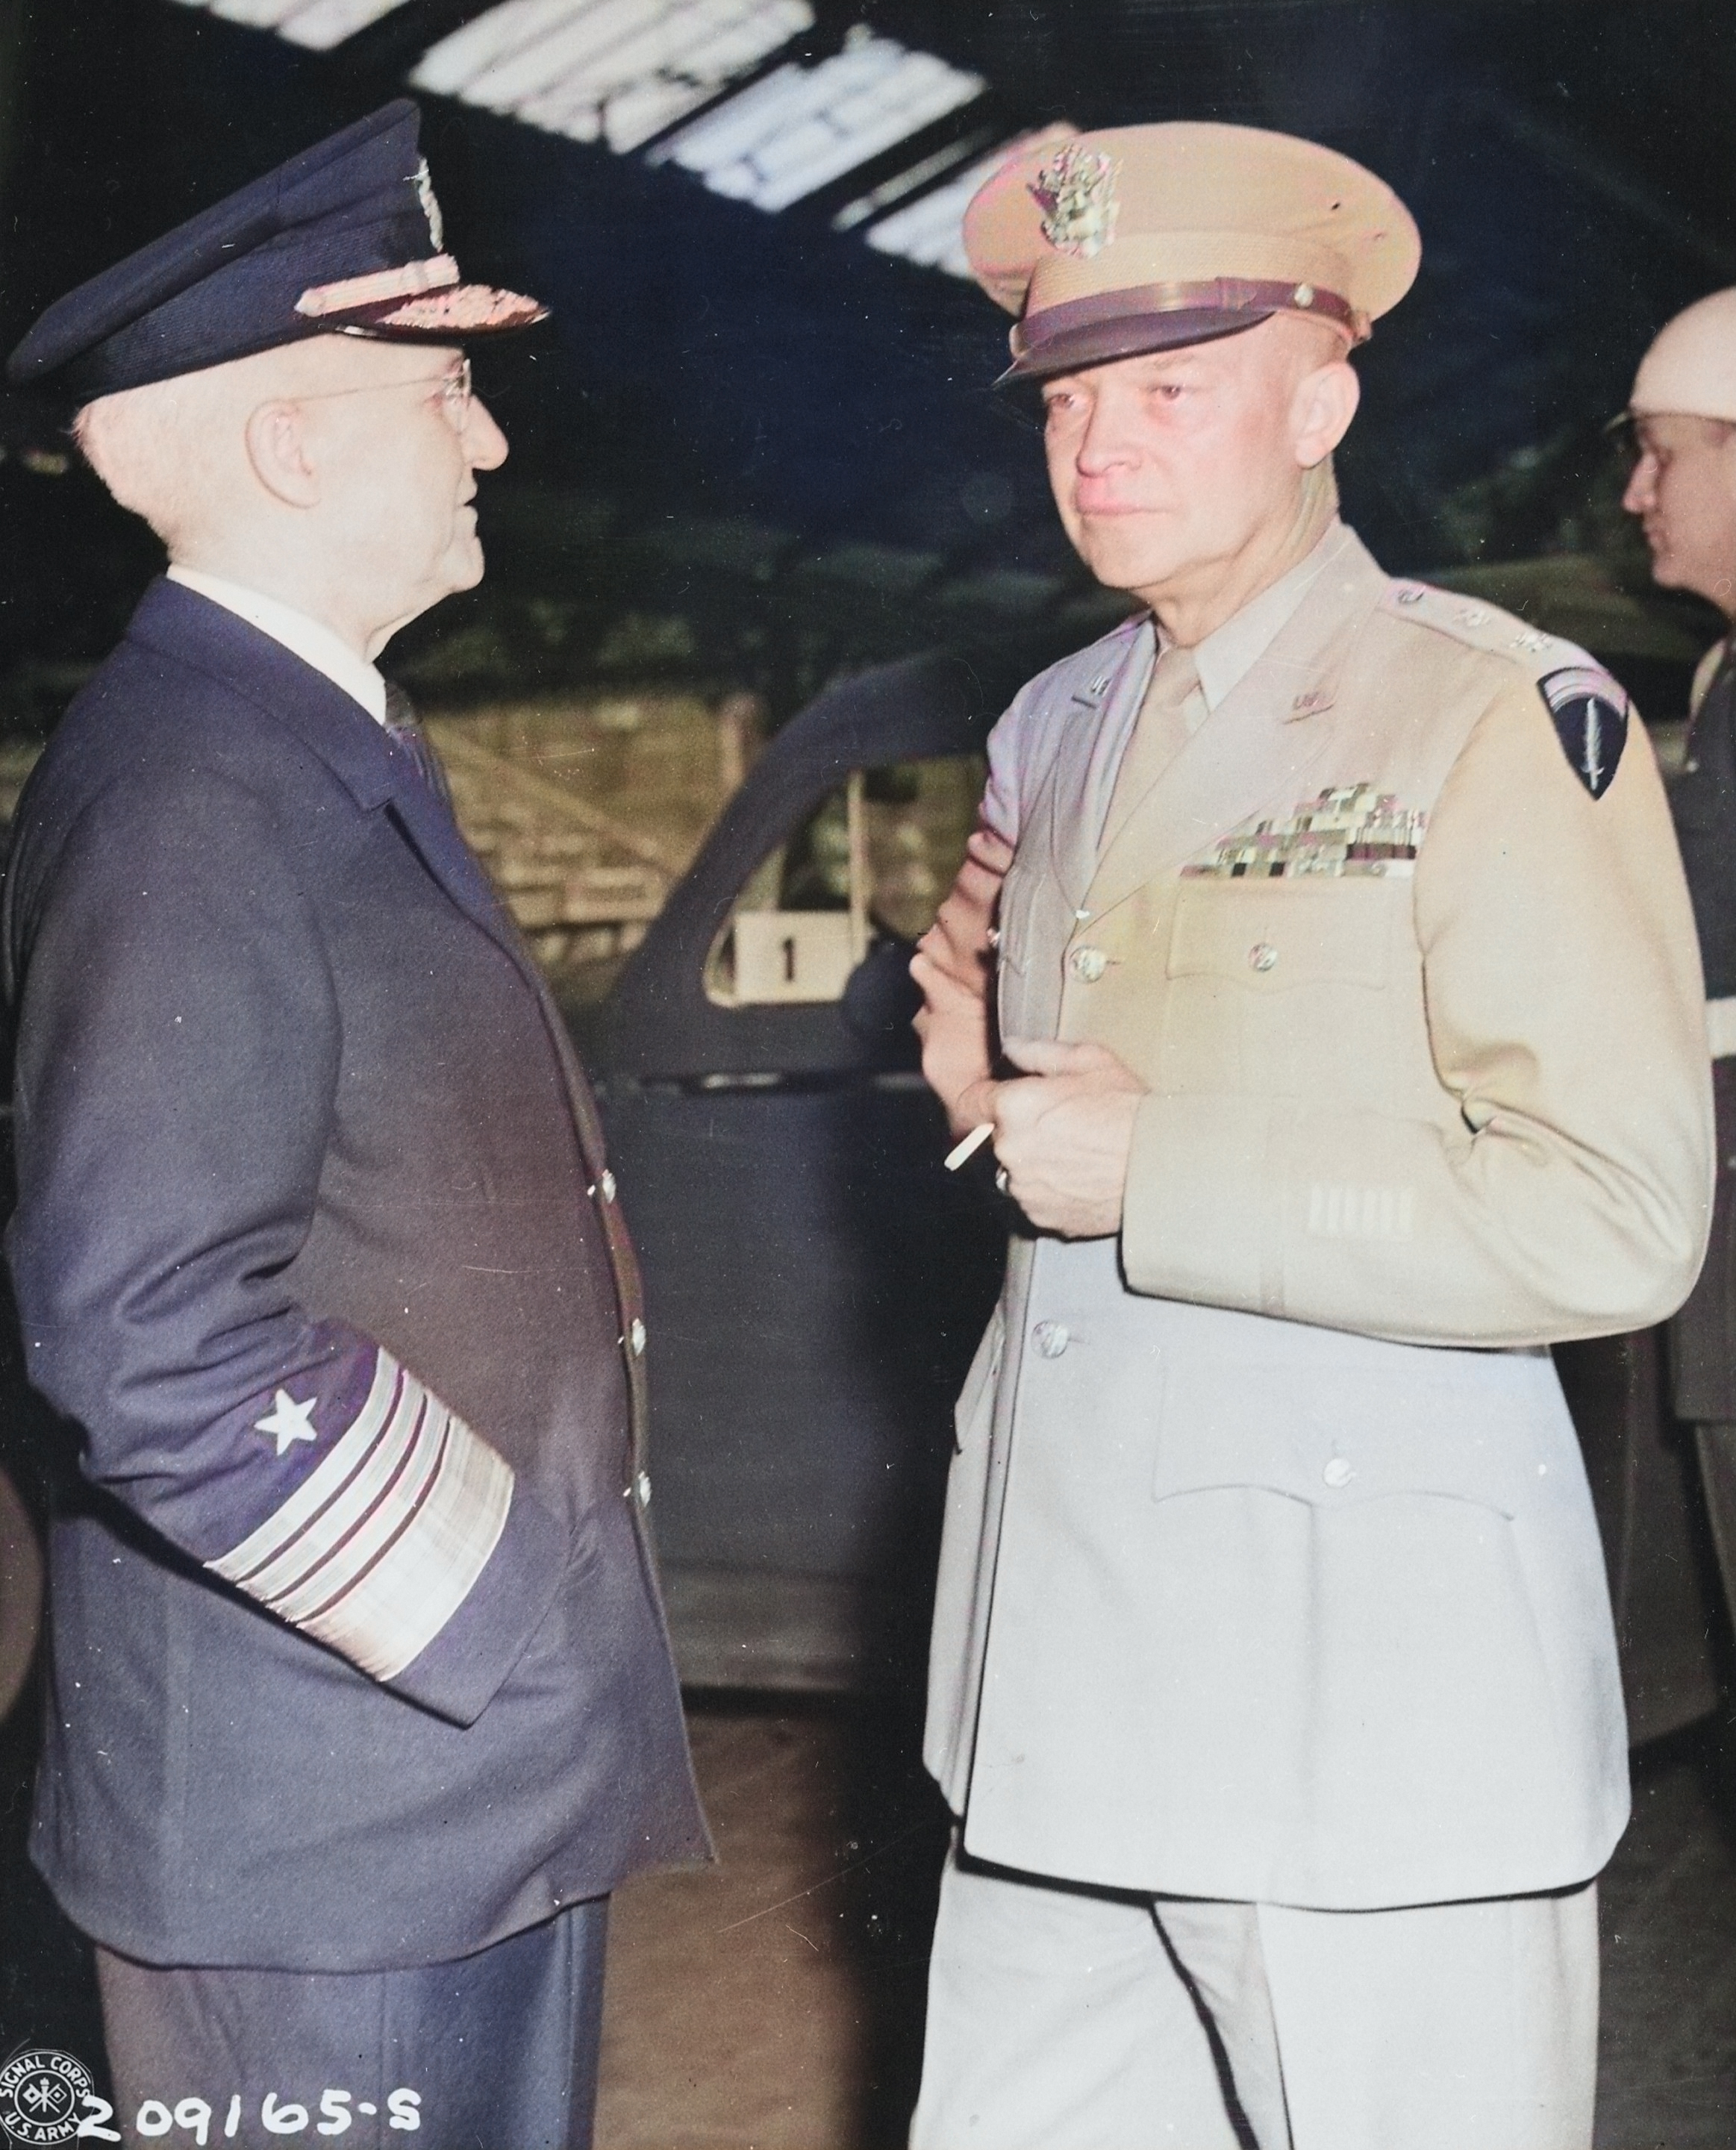 Admiral Harold Stark and General Dwight Eisenhower at Antwerp, Belgium, 15 Jul 1945, photo 2 of 2; they were awaiting the arrival of US President Harry Truman, en route for the Potsdam Conference [Colorized by WW2DB]